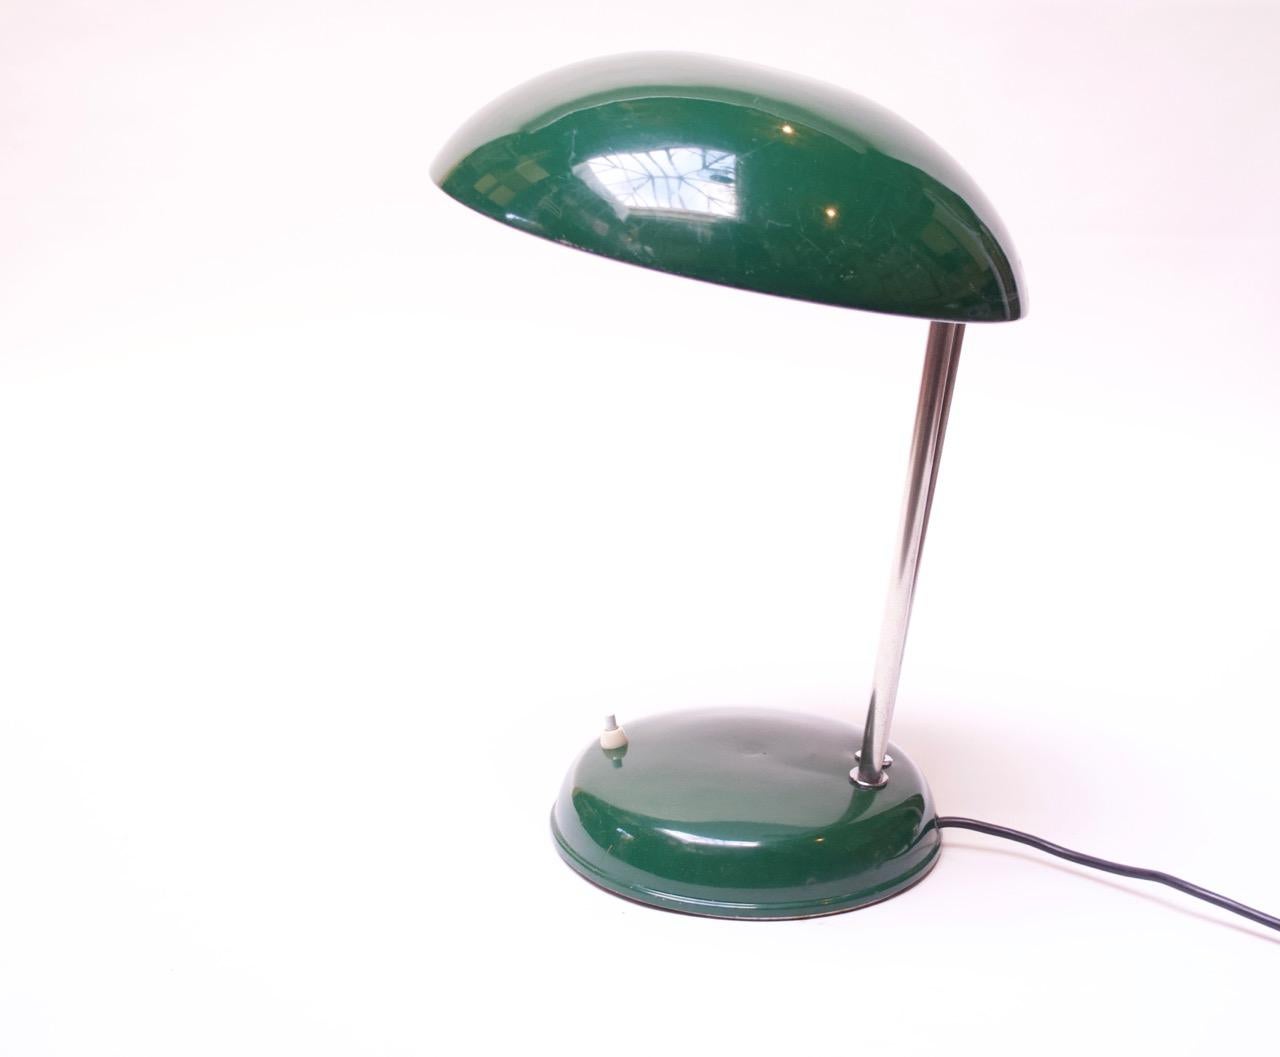 Enameled Bauhaus-Style 1940s Adjustable Table Lamp Attributed to Philips